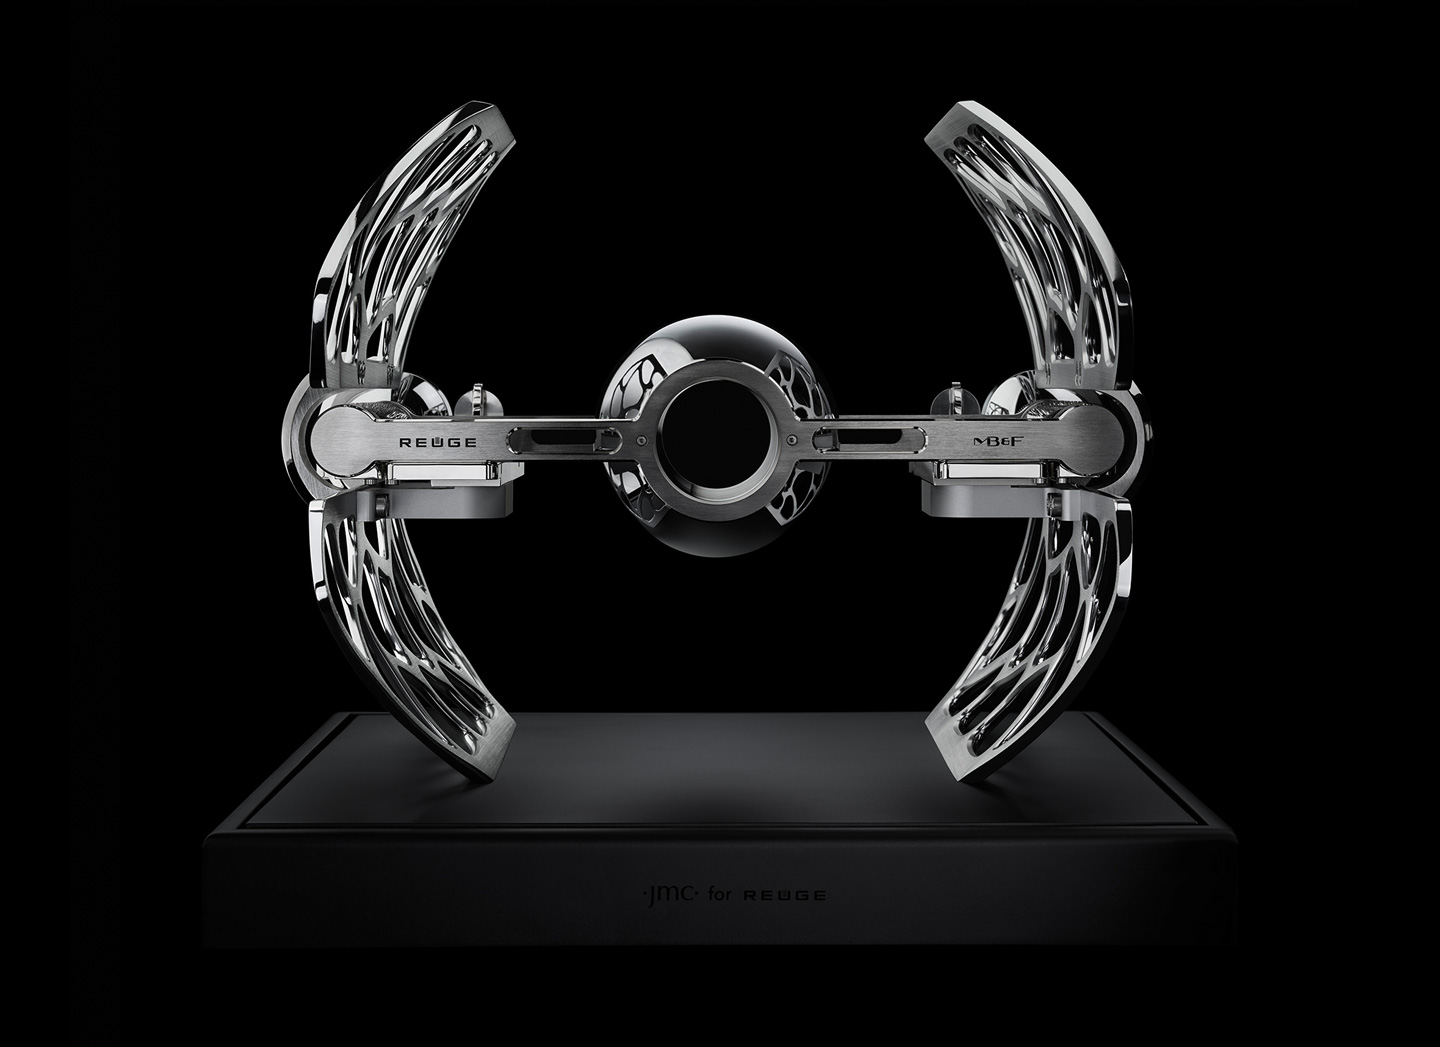 https://www.mbandf.com/files/machines/co-creations/musicmachine3/images/MM3-Chrome-Face_preview.jpg